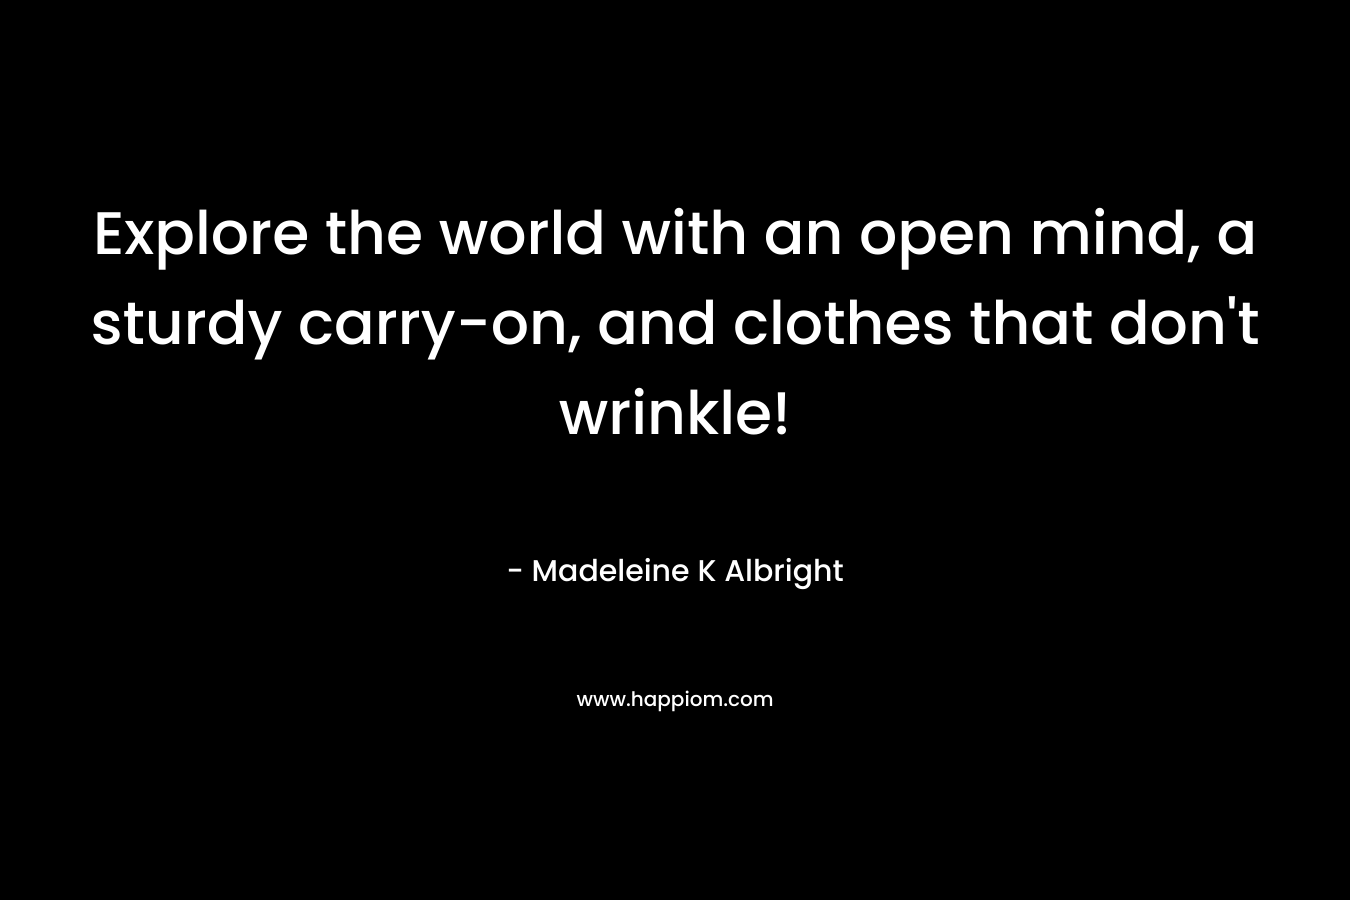 Explore the world with an open mind, a sturdy carry-on, and clothes that don’t wrinkle! – Madeleine K Albright